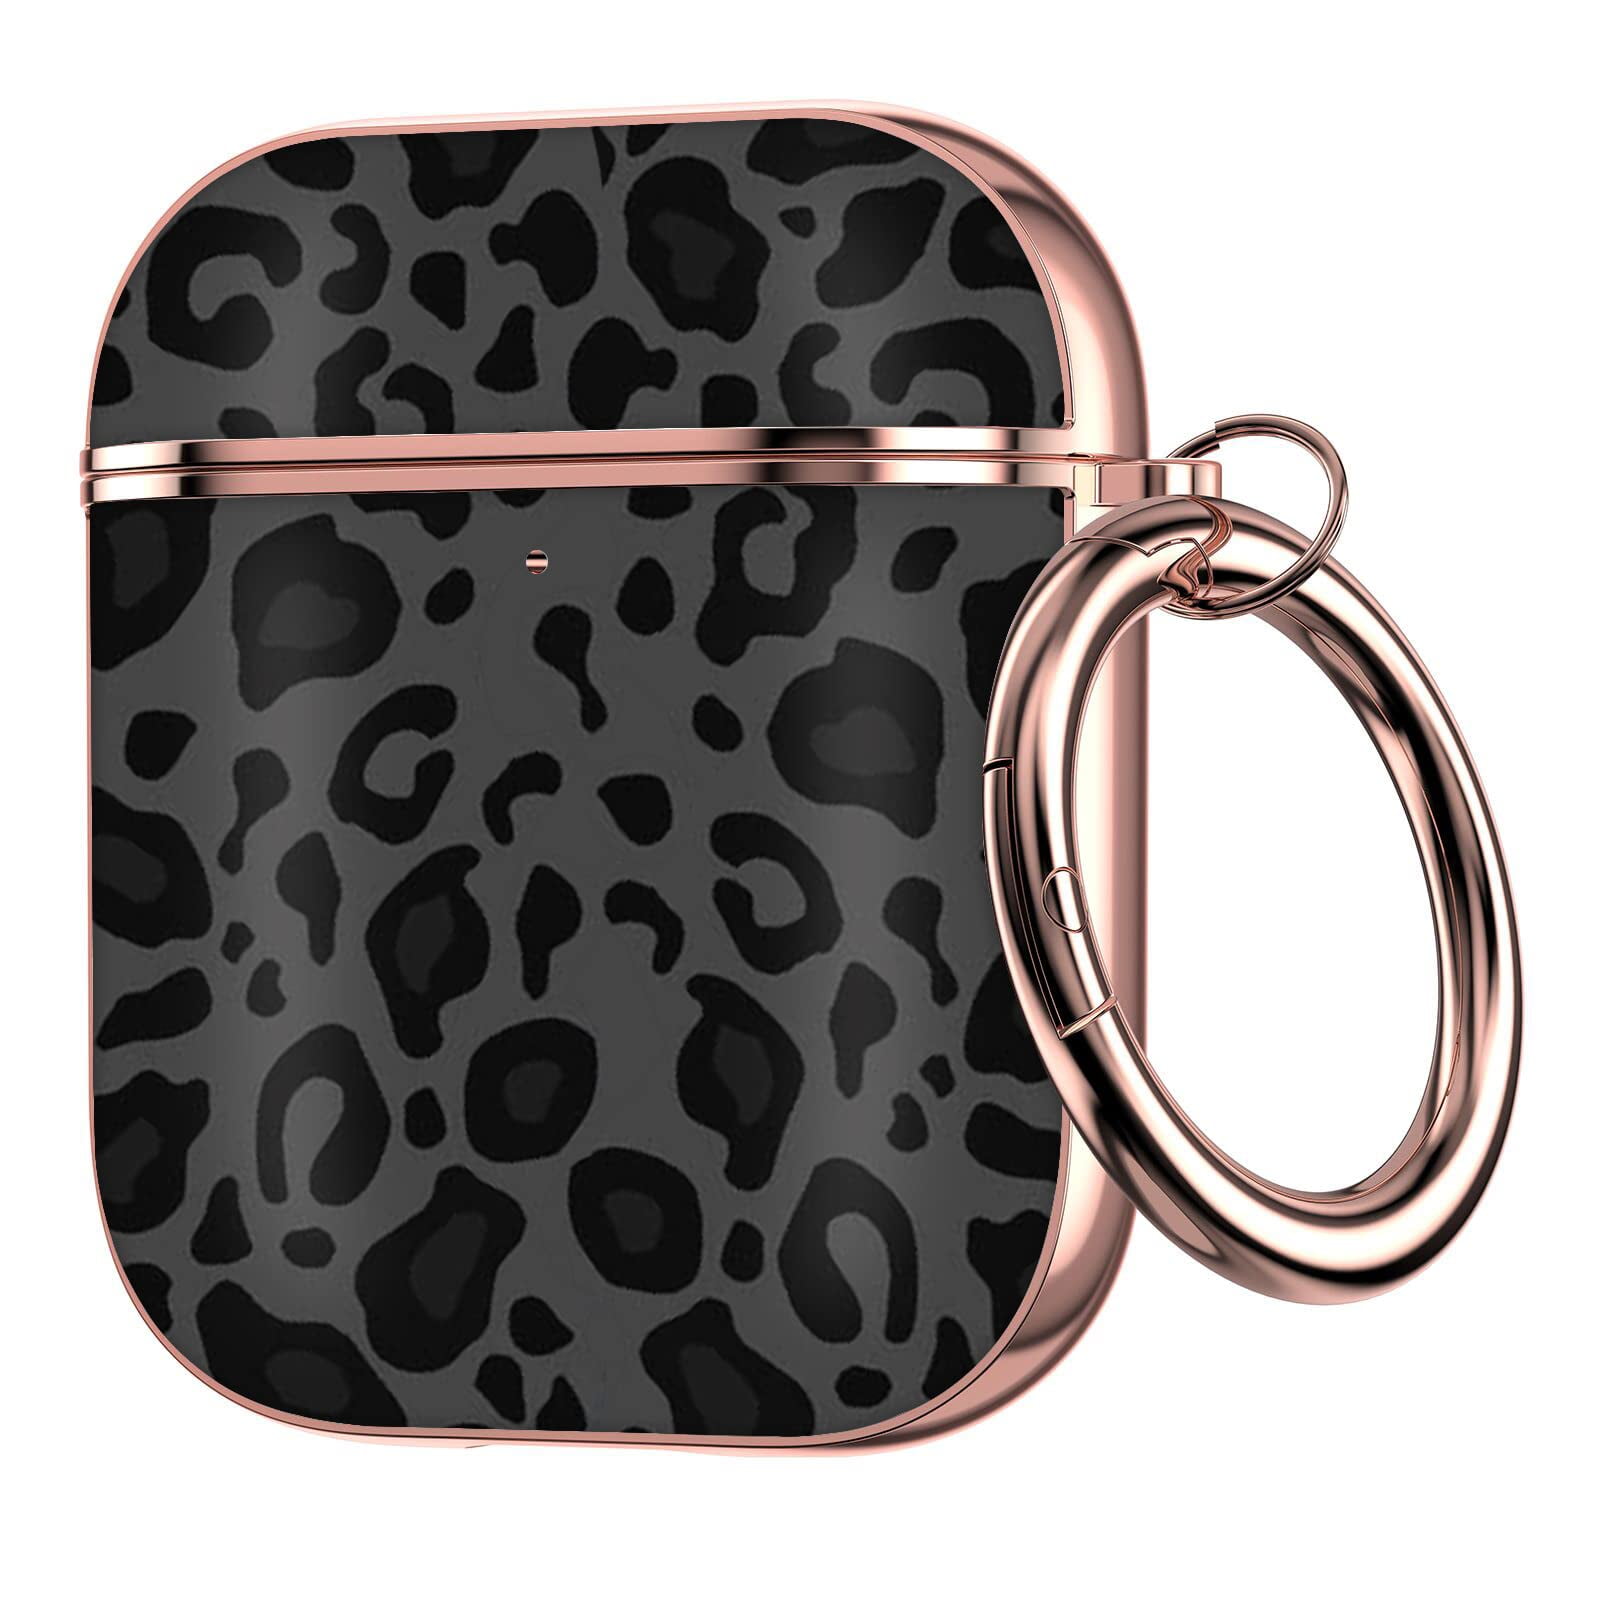 Maxjoy for AirPods Case with Lock, Leopard AirPod Case Lock Hard